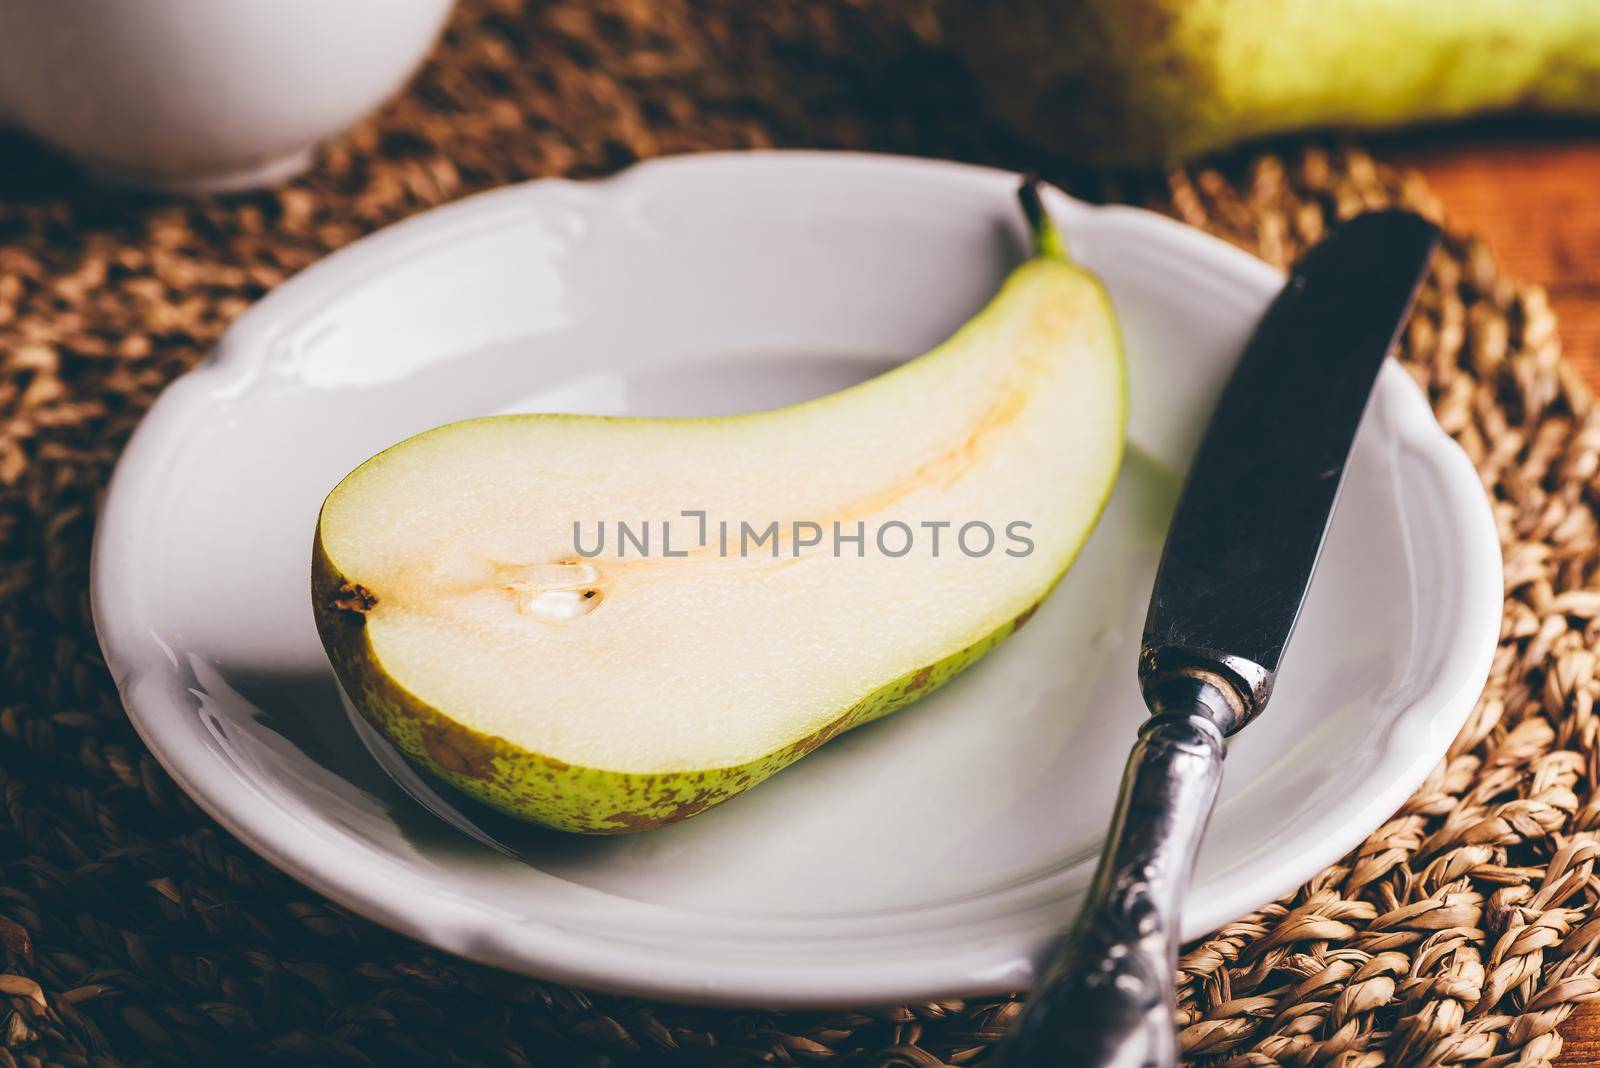 Half of Conference Pear on White Plate with Knife